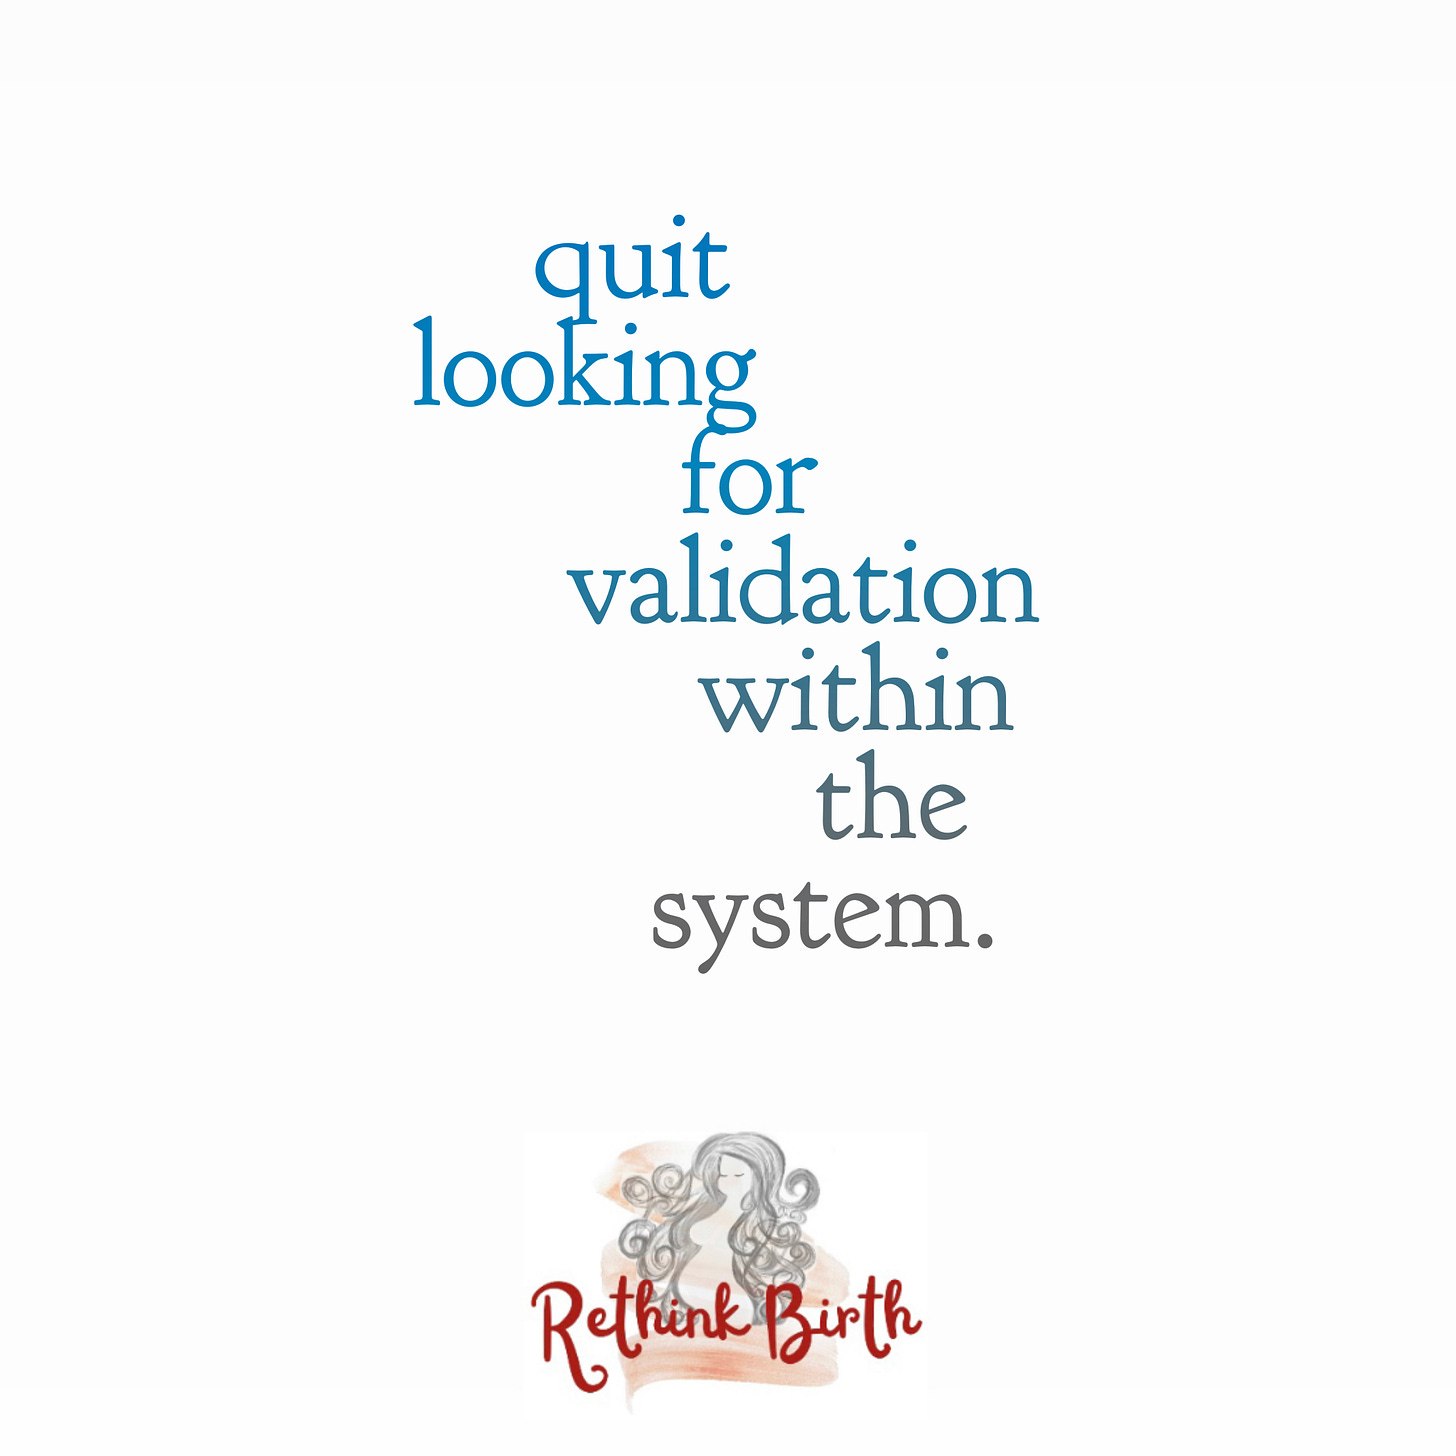 quit looking for validation within the system.